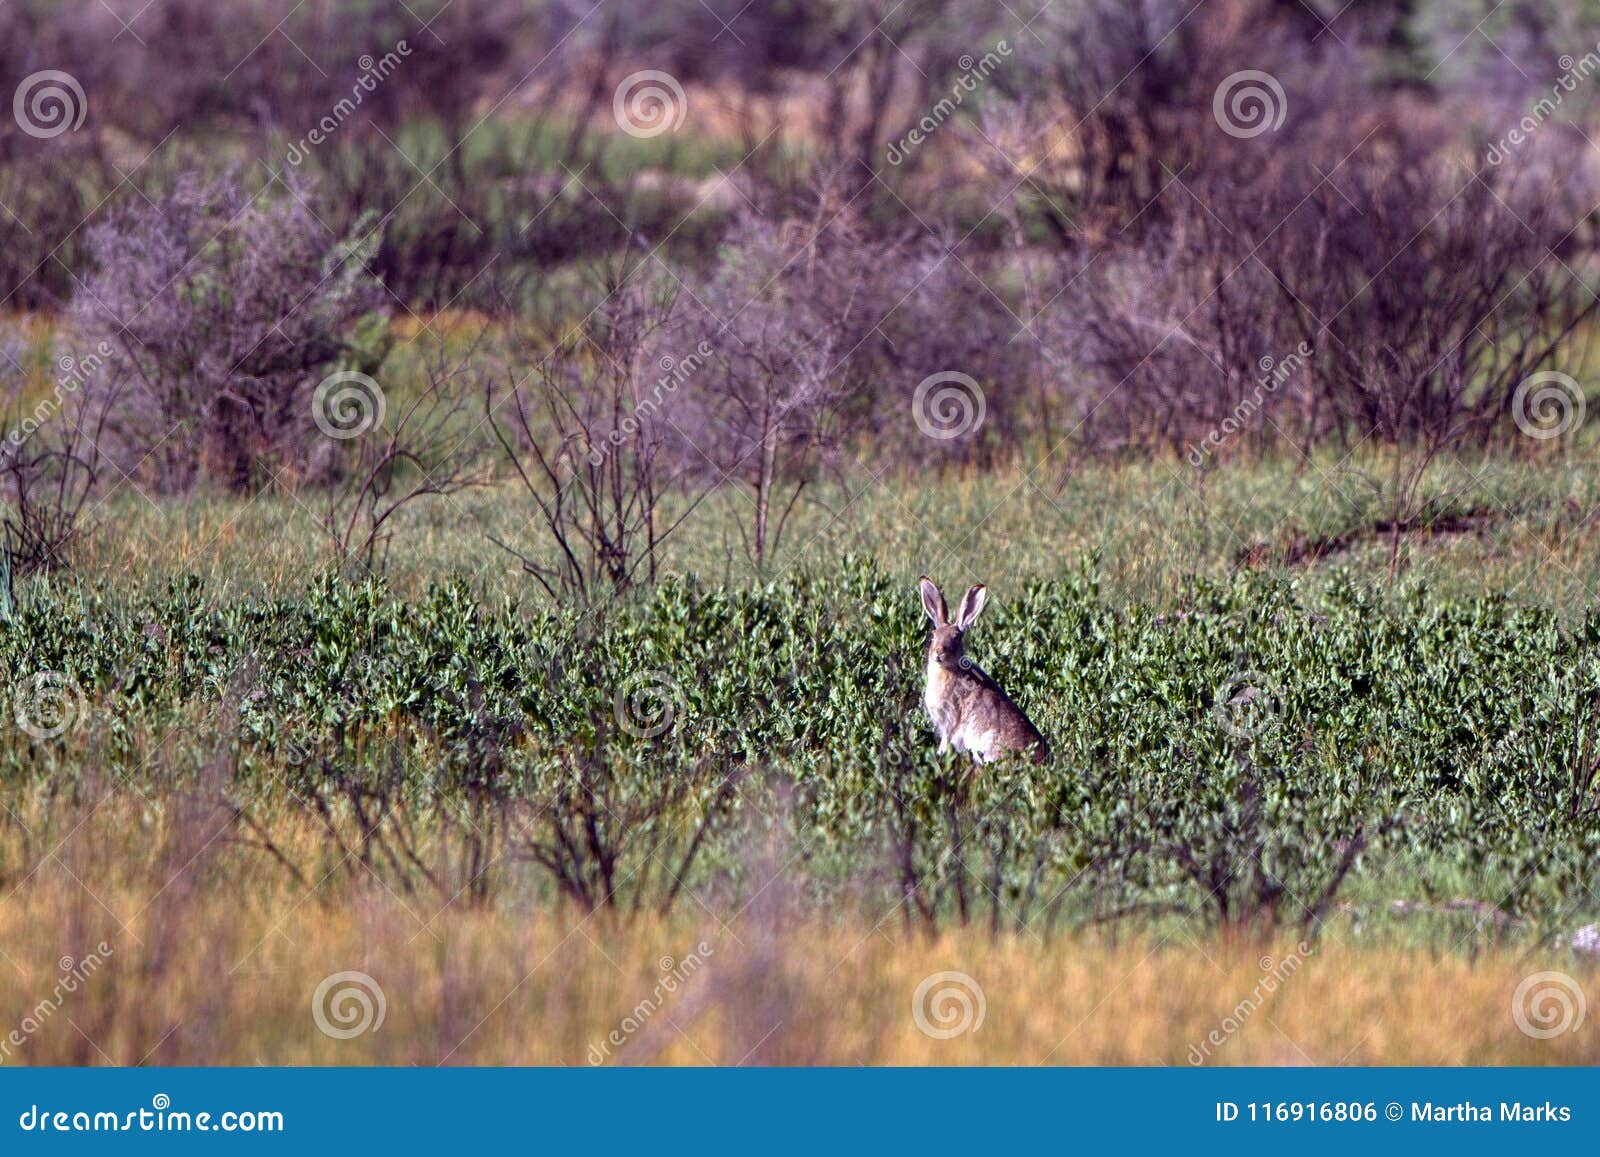 white-tailed jackrabbit, or prairie jack, a big rodent with long ears, in alamosa national wildlife refuge